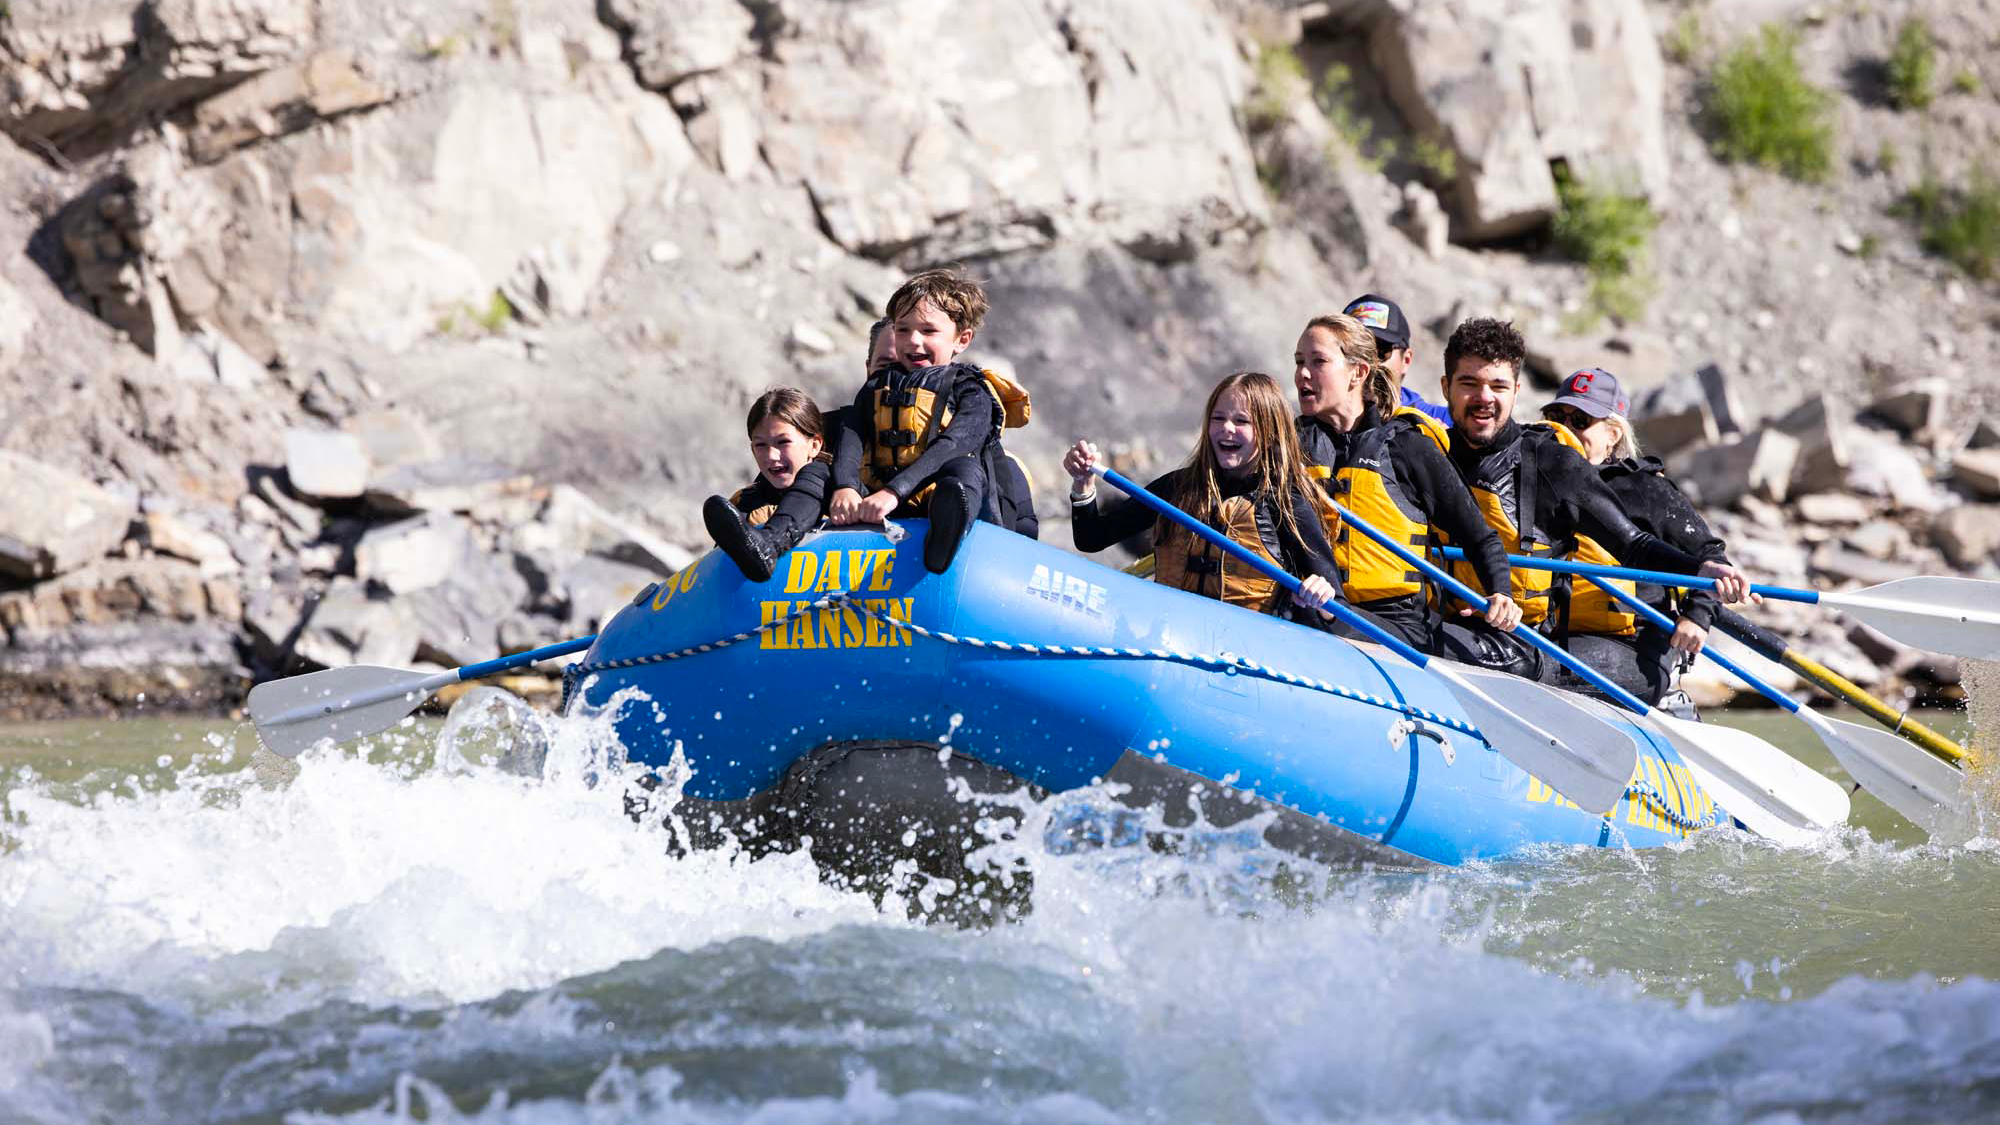 Young boy riding on the front of a blue Dave Hansen Whitewater raft through whitewater rapids on the Snake River.